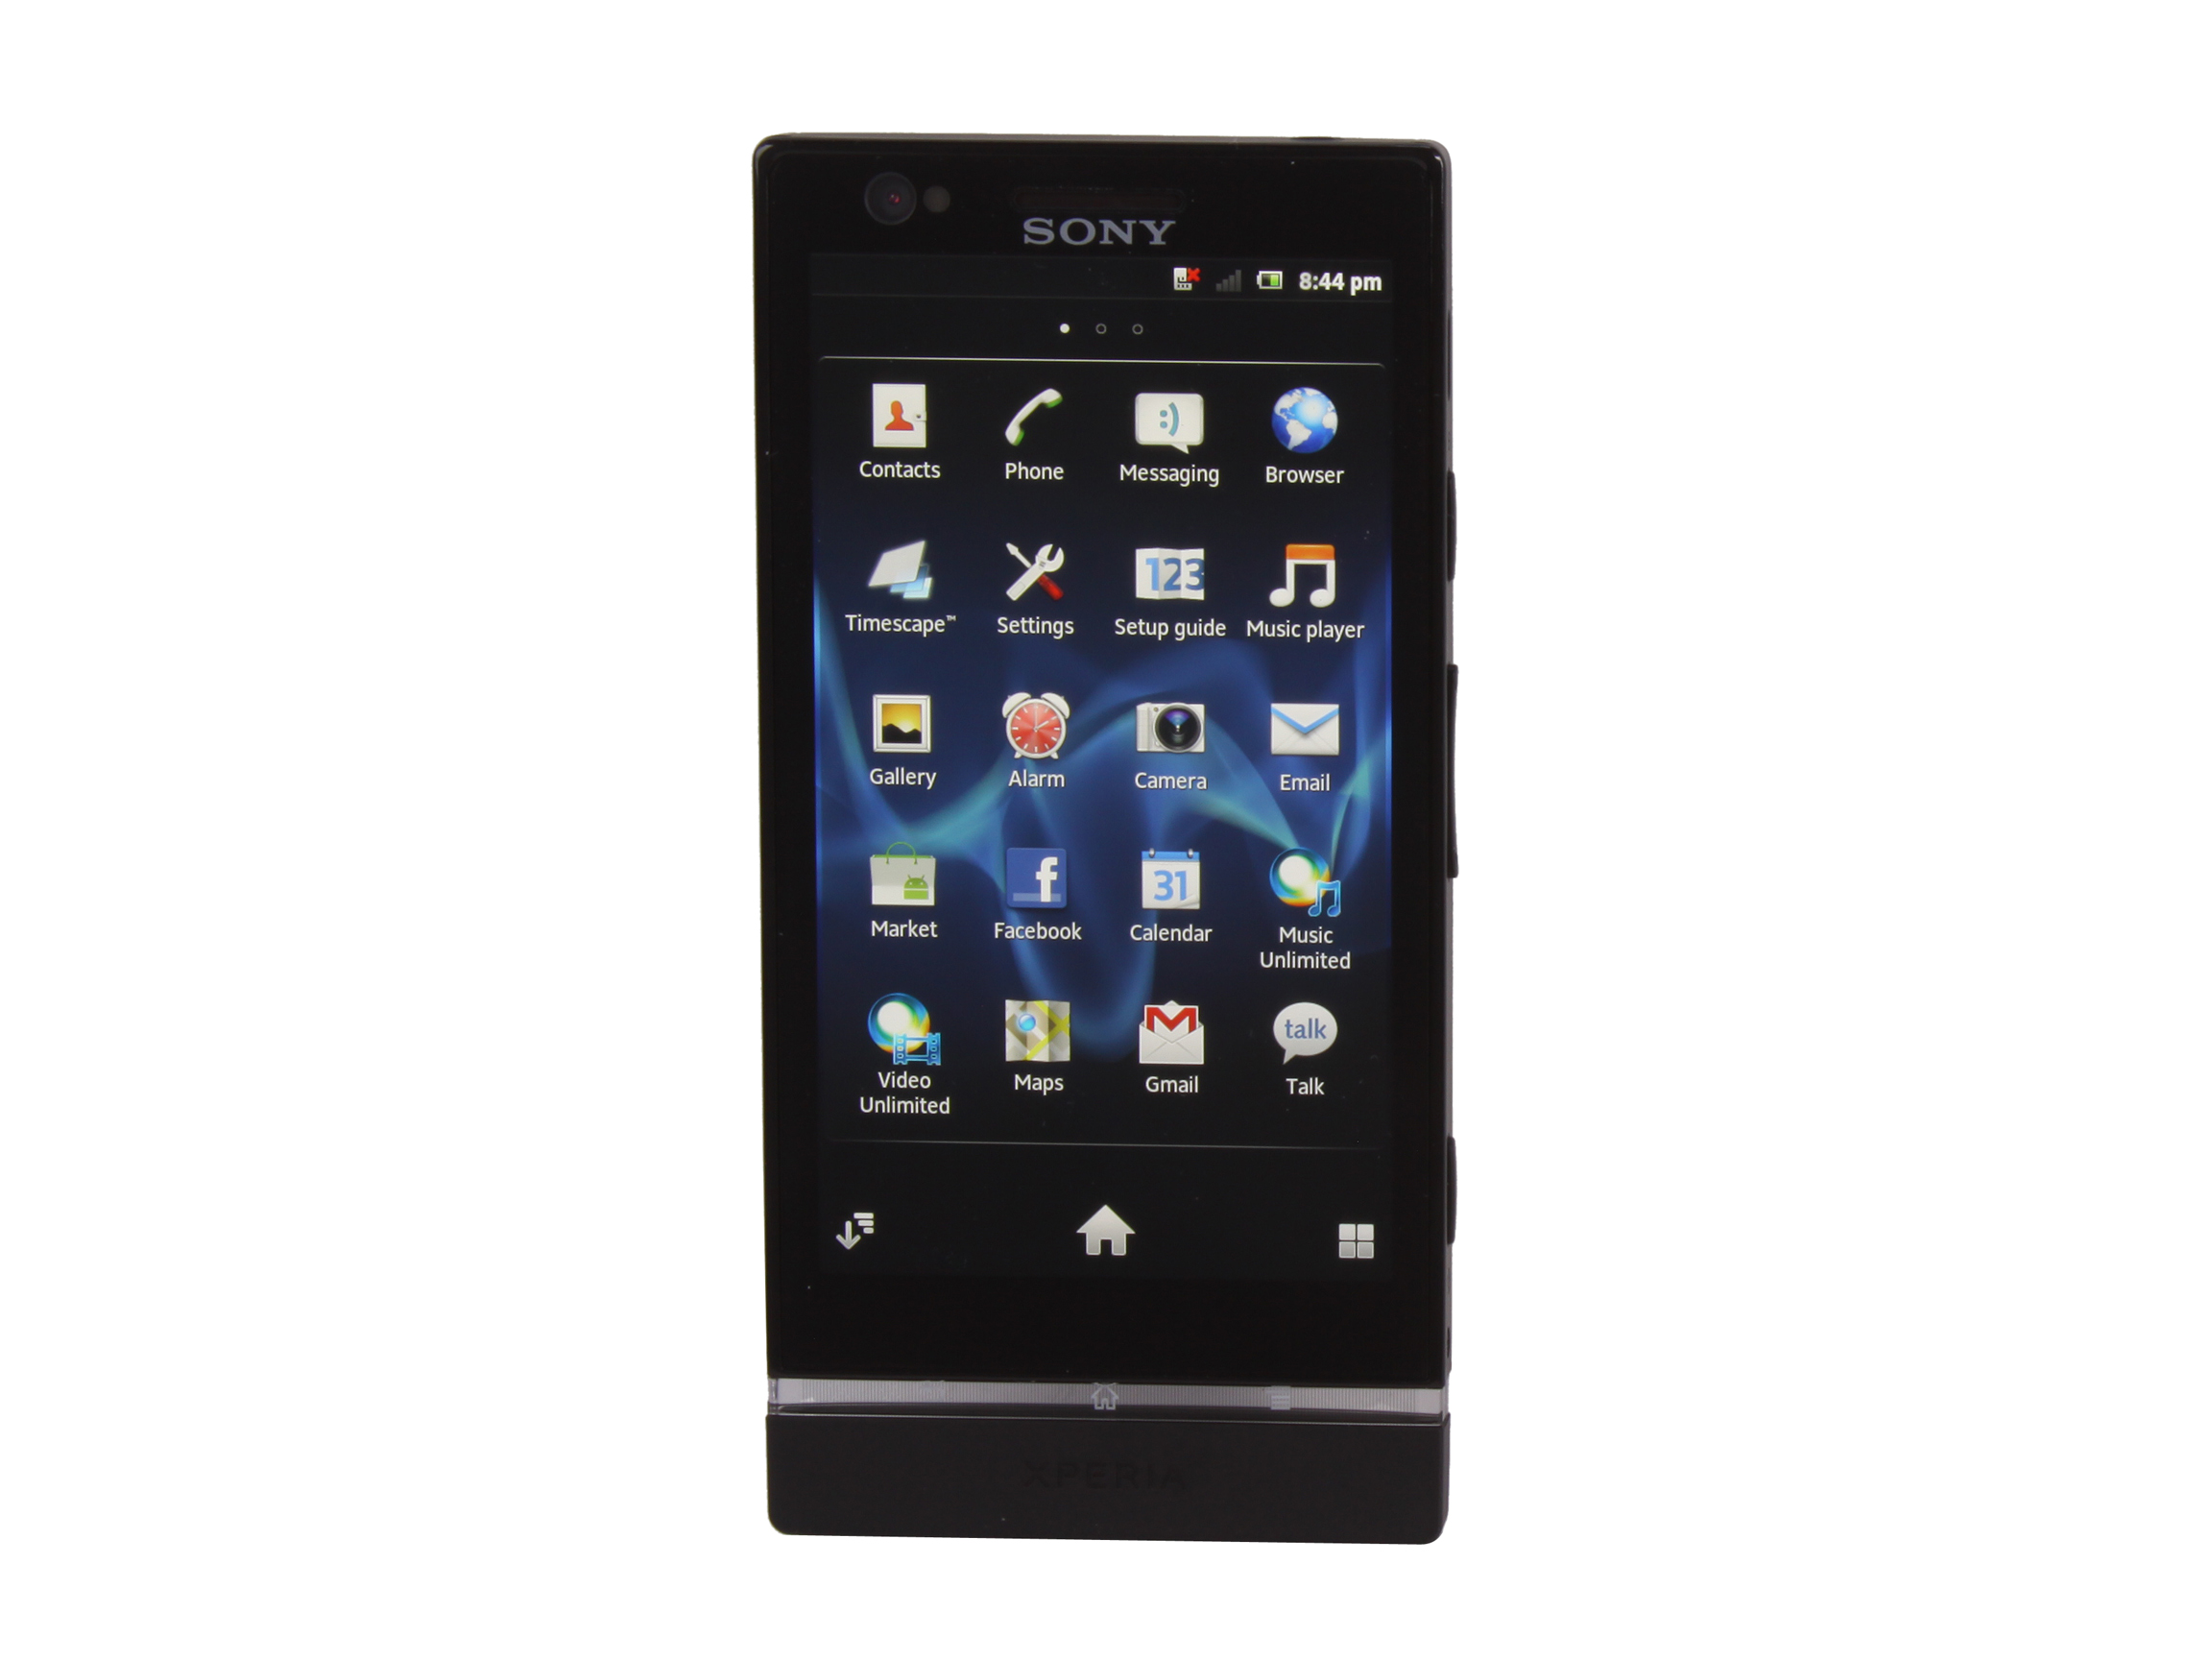 Sony Xperia P LT22i 16 GB (13 GB user available), 1 GB RAM Black Unlocked Android GSM Smart Phone with Sony WhiteMagic Technology / 4" Screen 4.0"